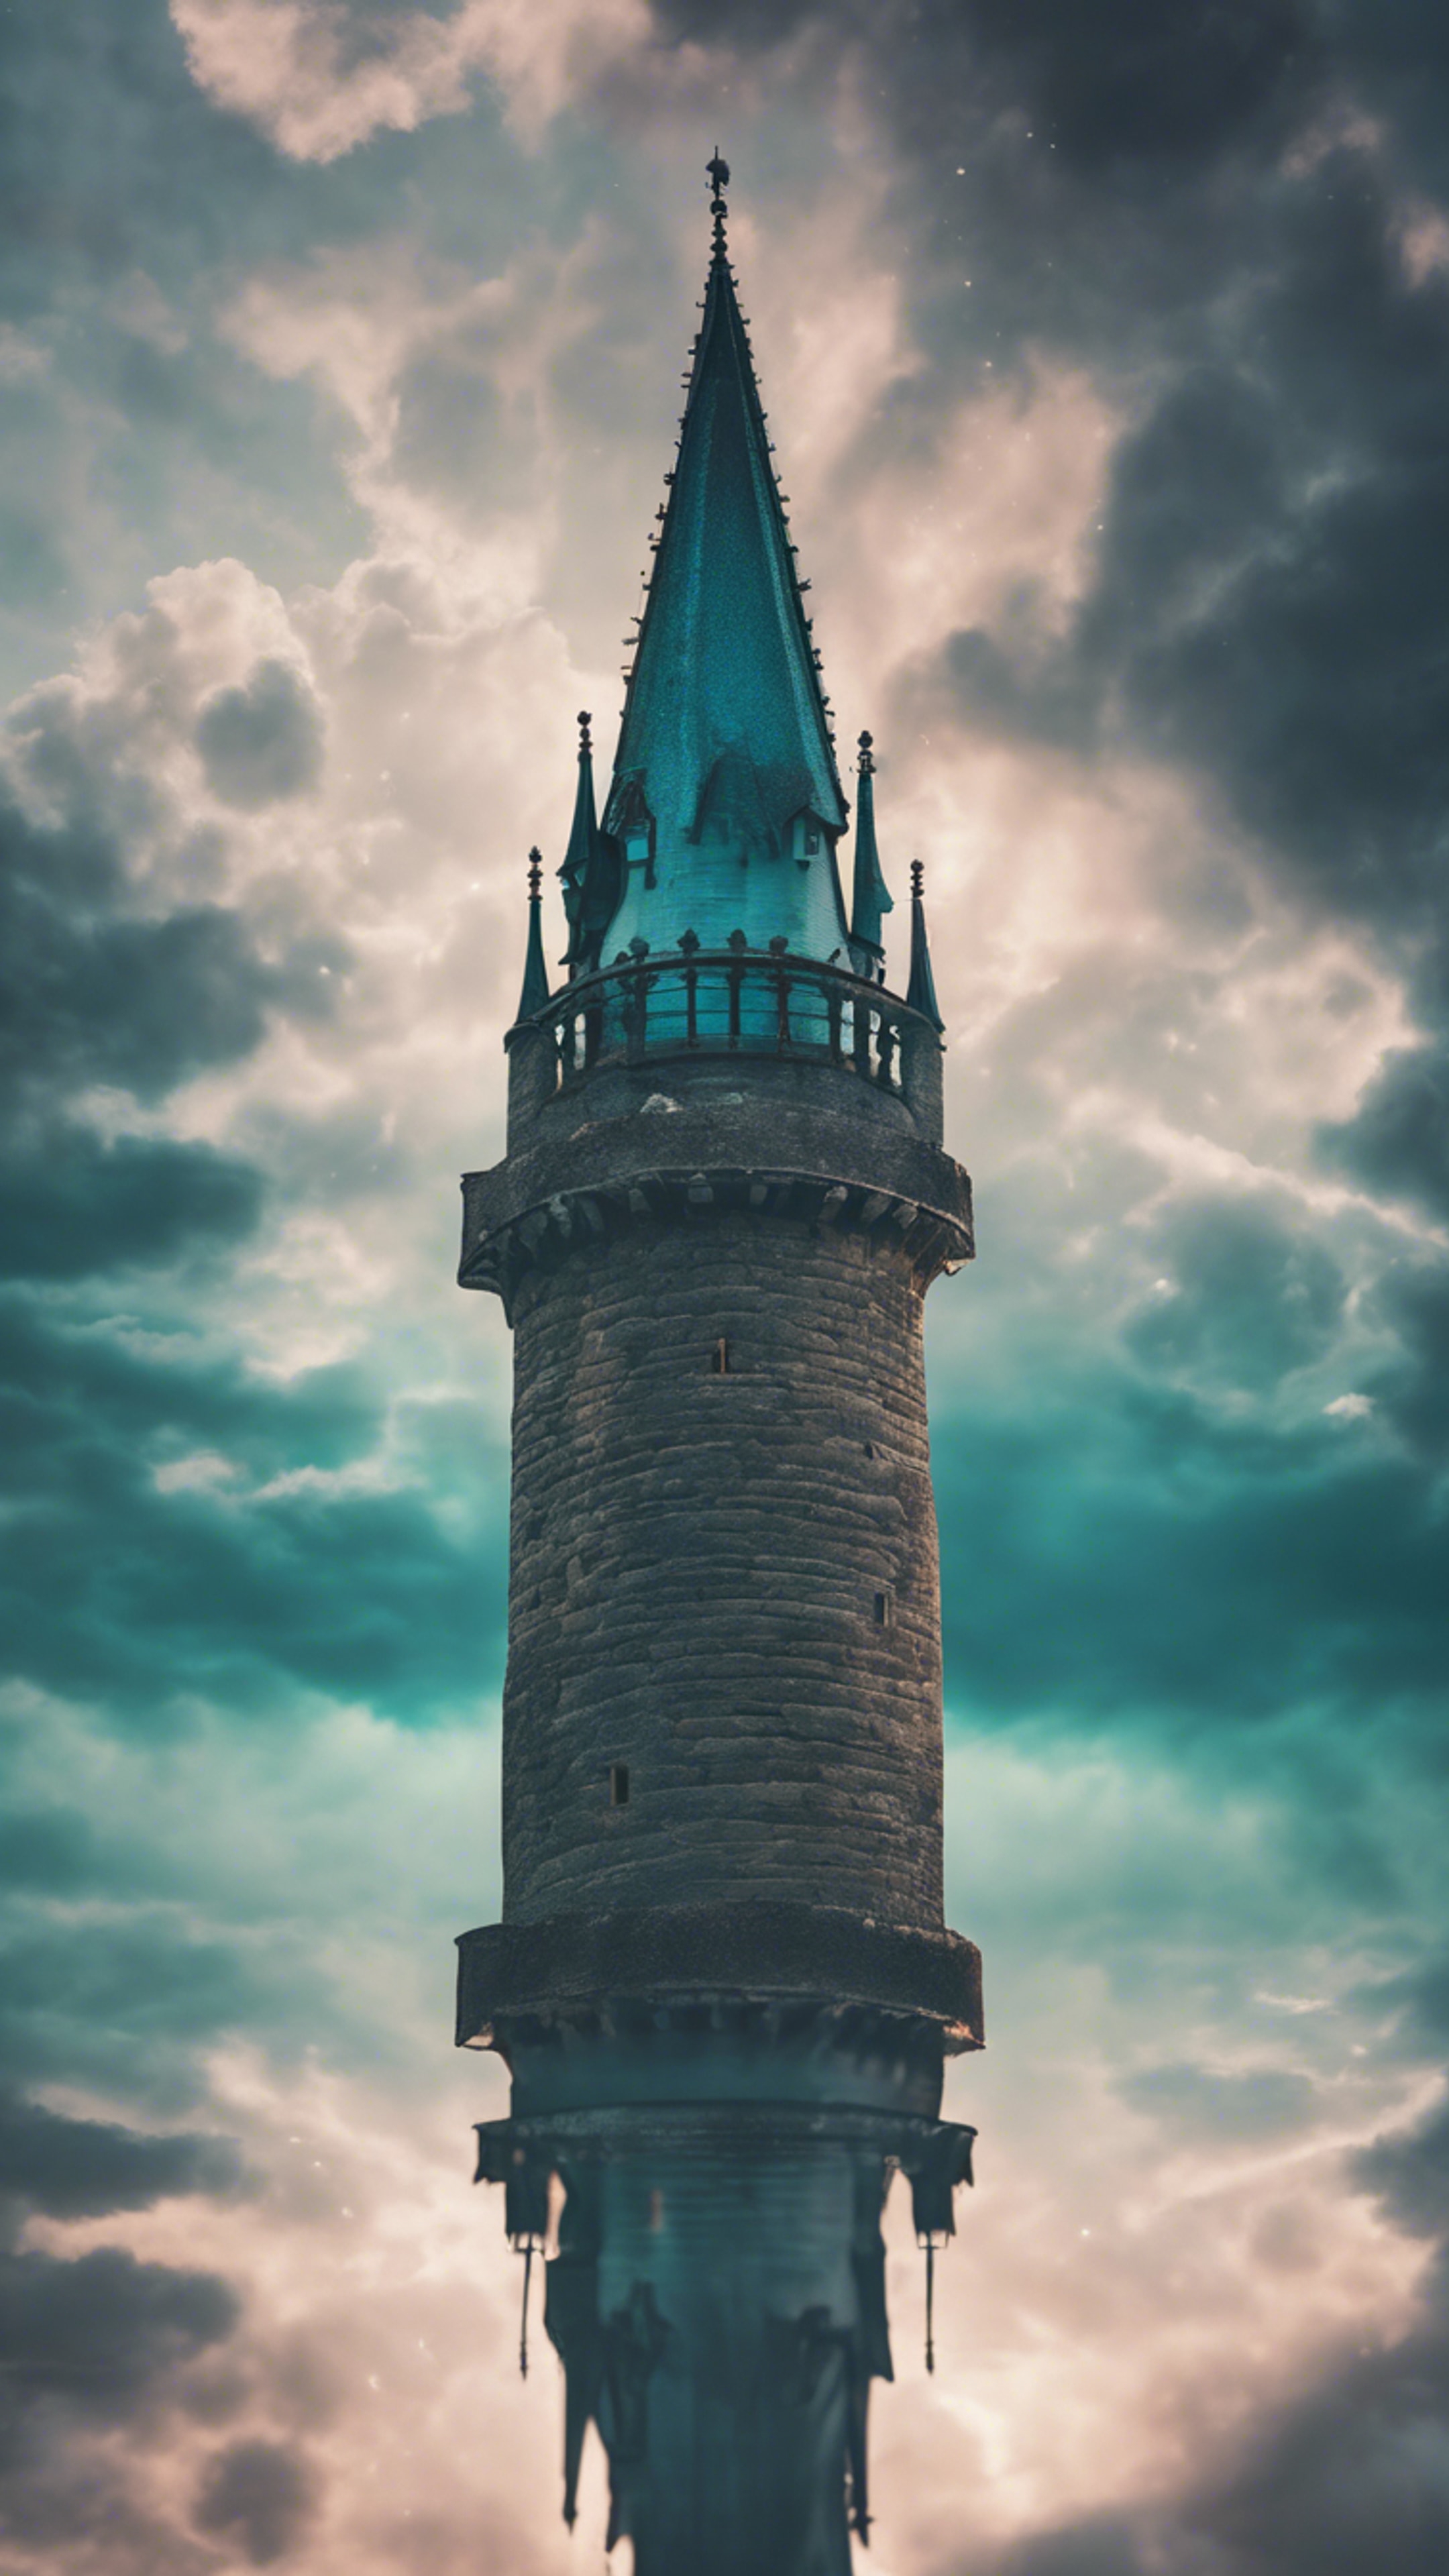 A Gothic castle tower reaching into the clouds, lit from within by mystery teal lights. Kertas dinding[95b6d3de171842619bd4]